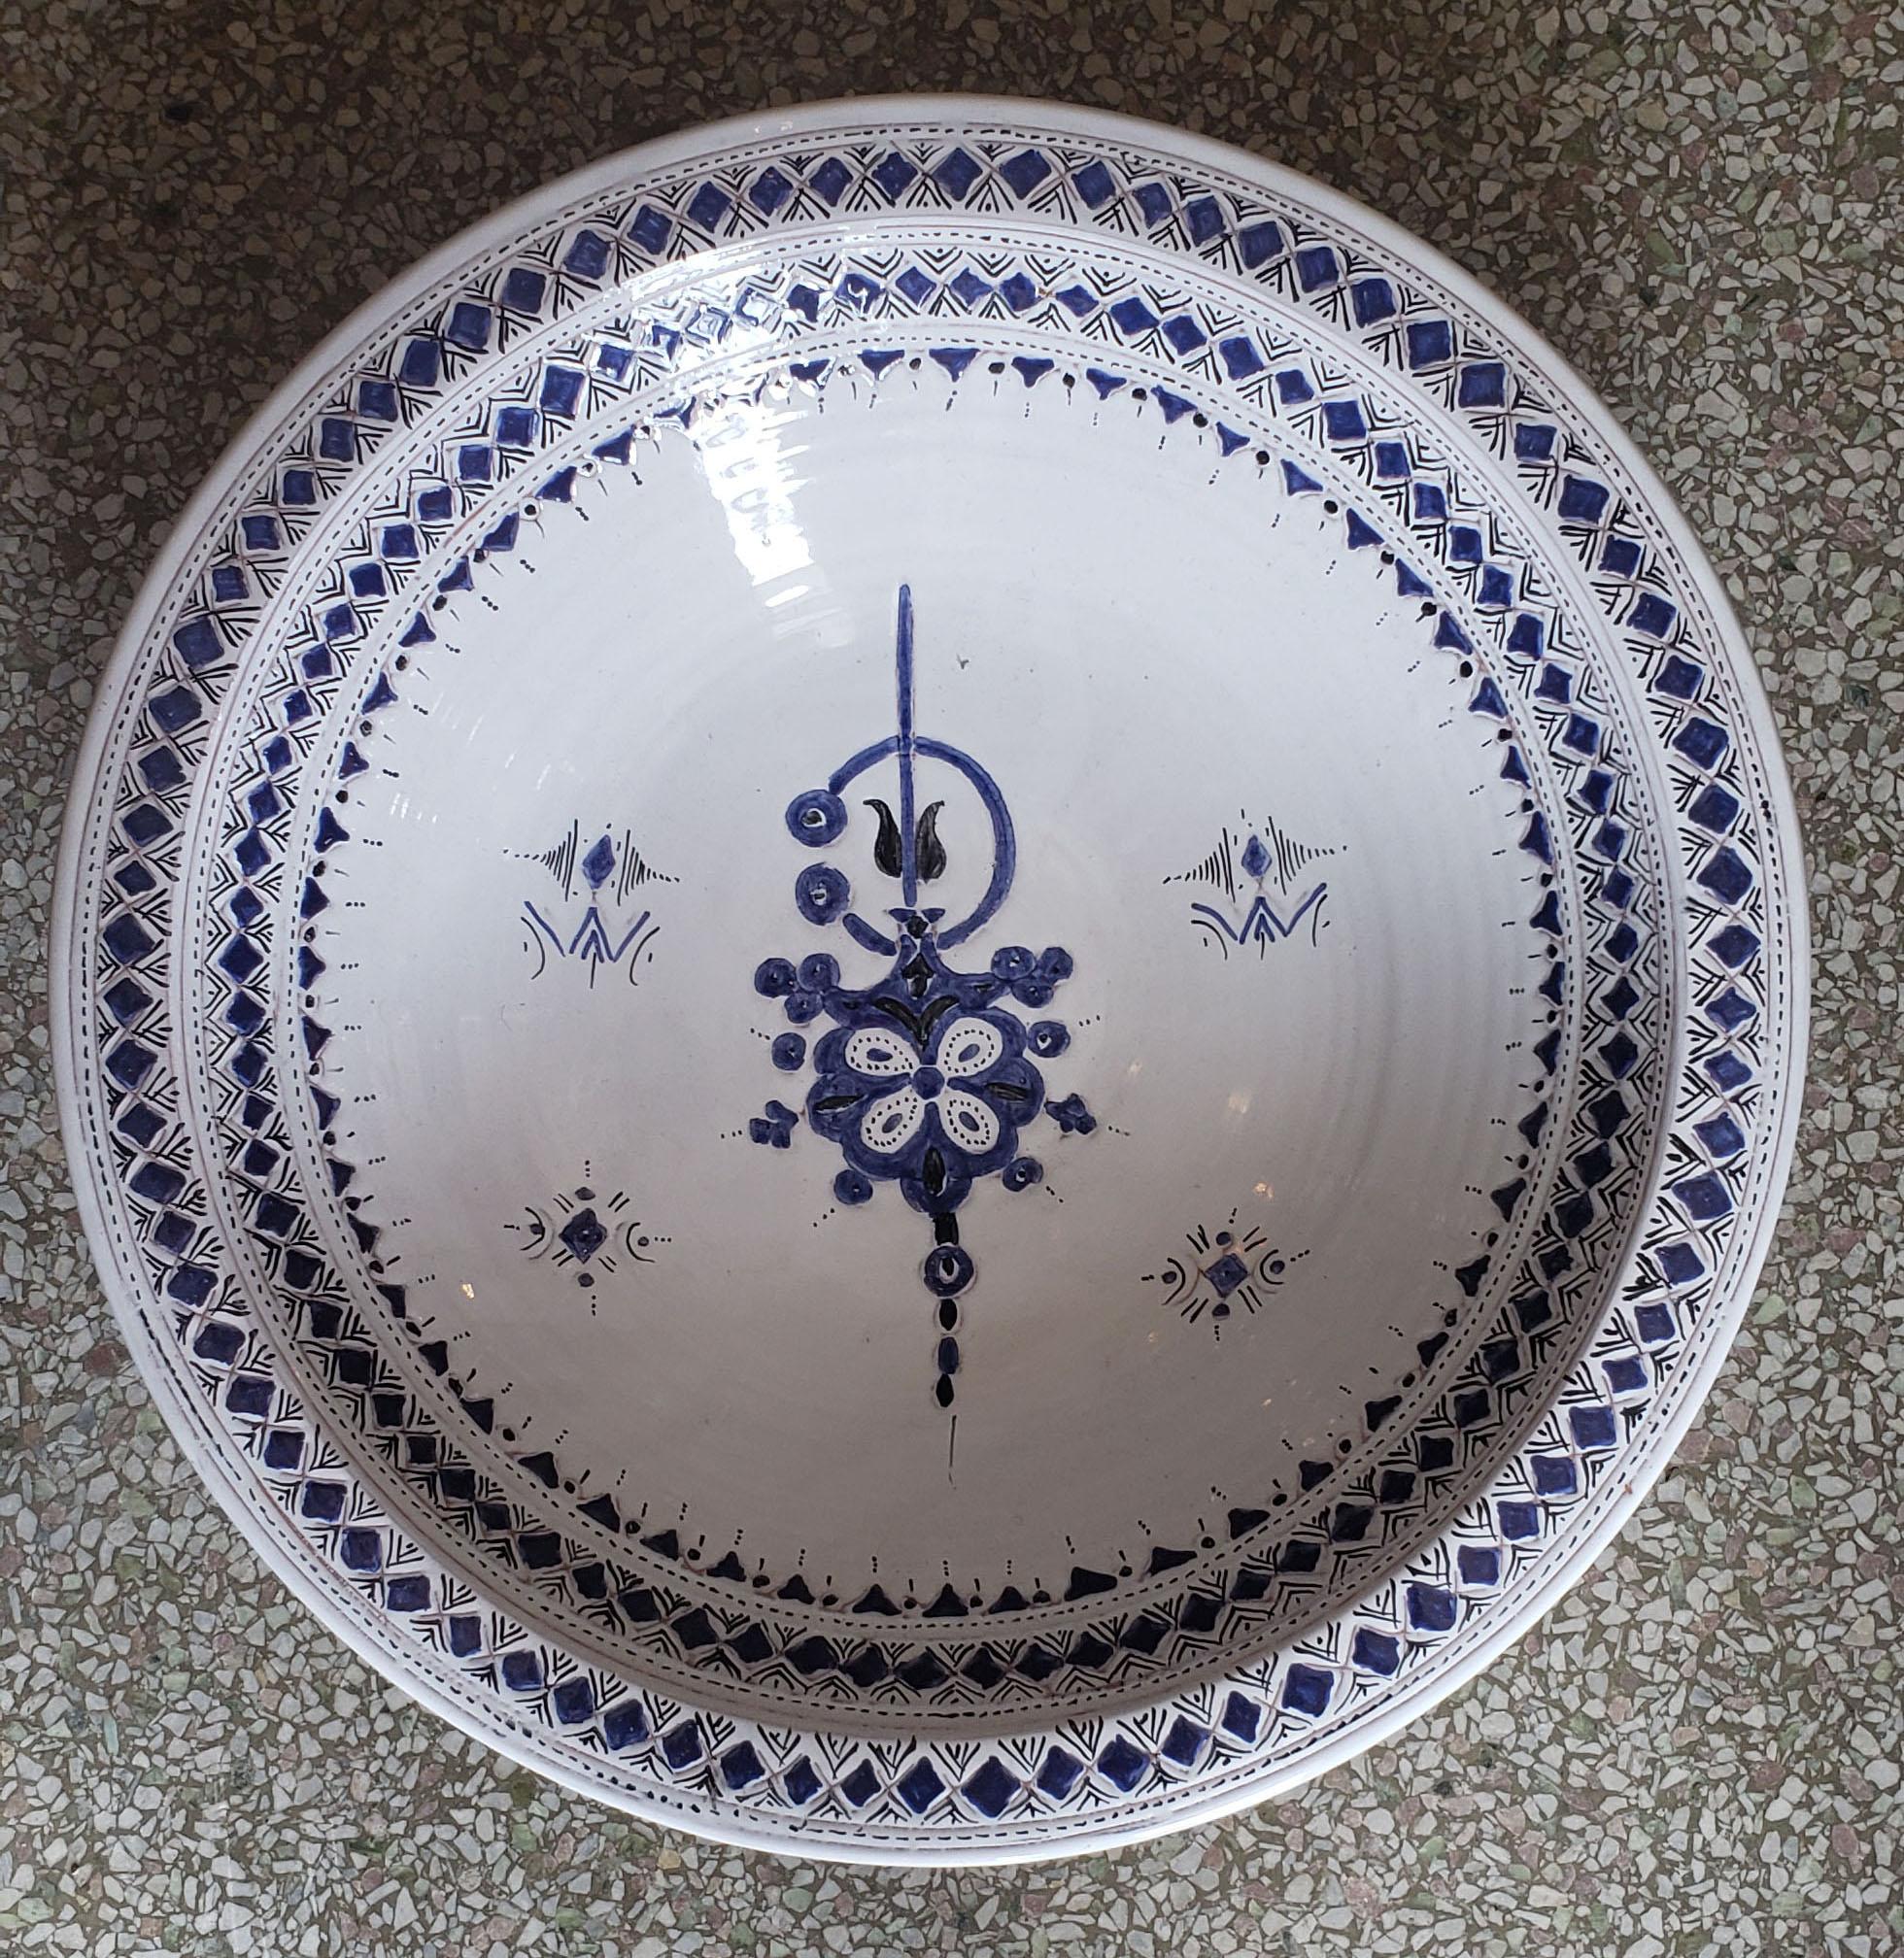 A rare or one of a kind exquisite Moroccan plate / charger for decoration purpose only. This plate is hand painted in blue and white, and inlaid with metal. This plate would be a great add-on to any décor. Great Handcraftsmanship and precision,